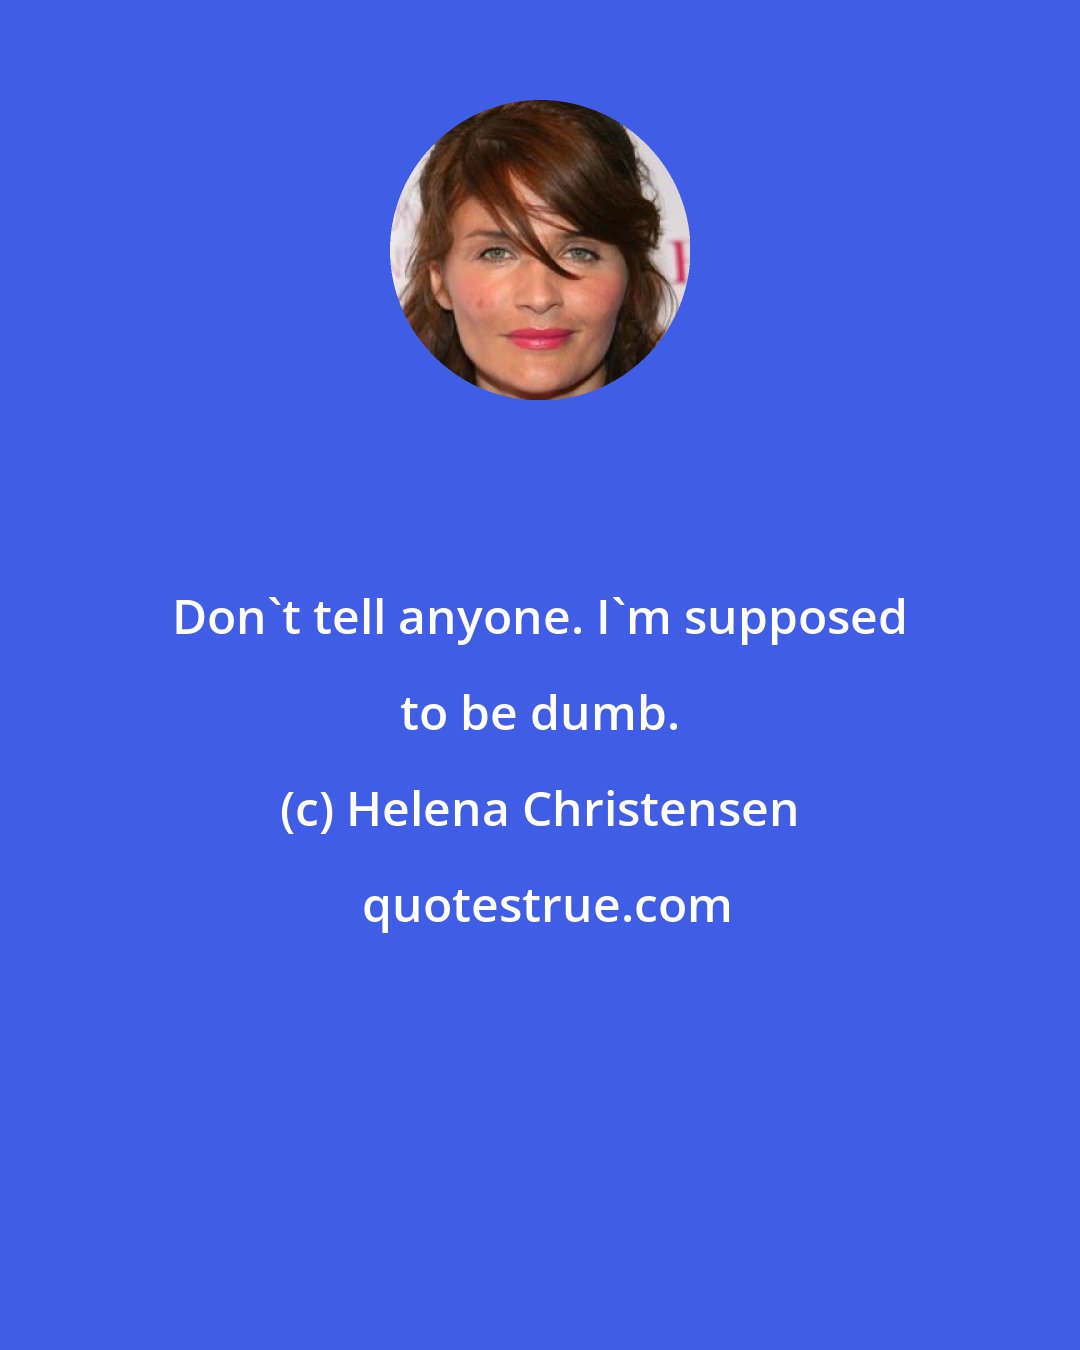 Helena Christensen: Don't tell anyone. I'm supposed to be dumb.